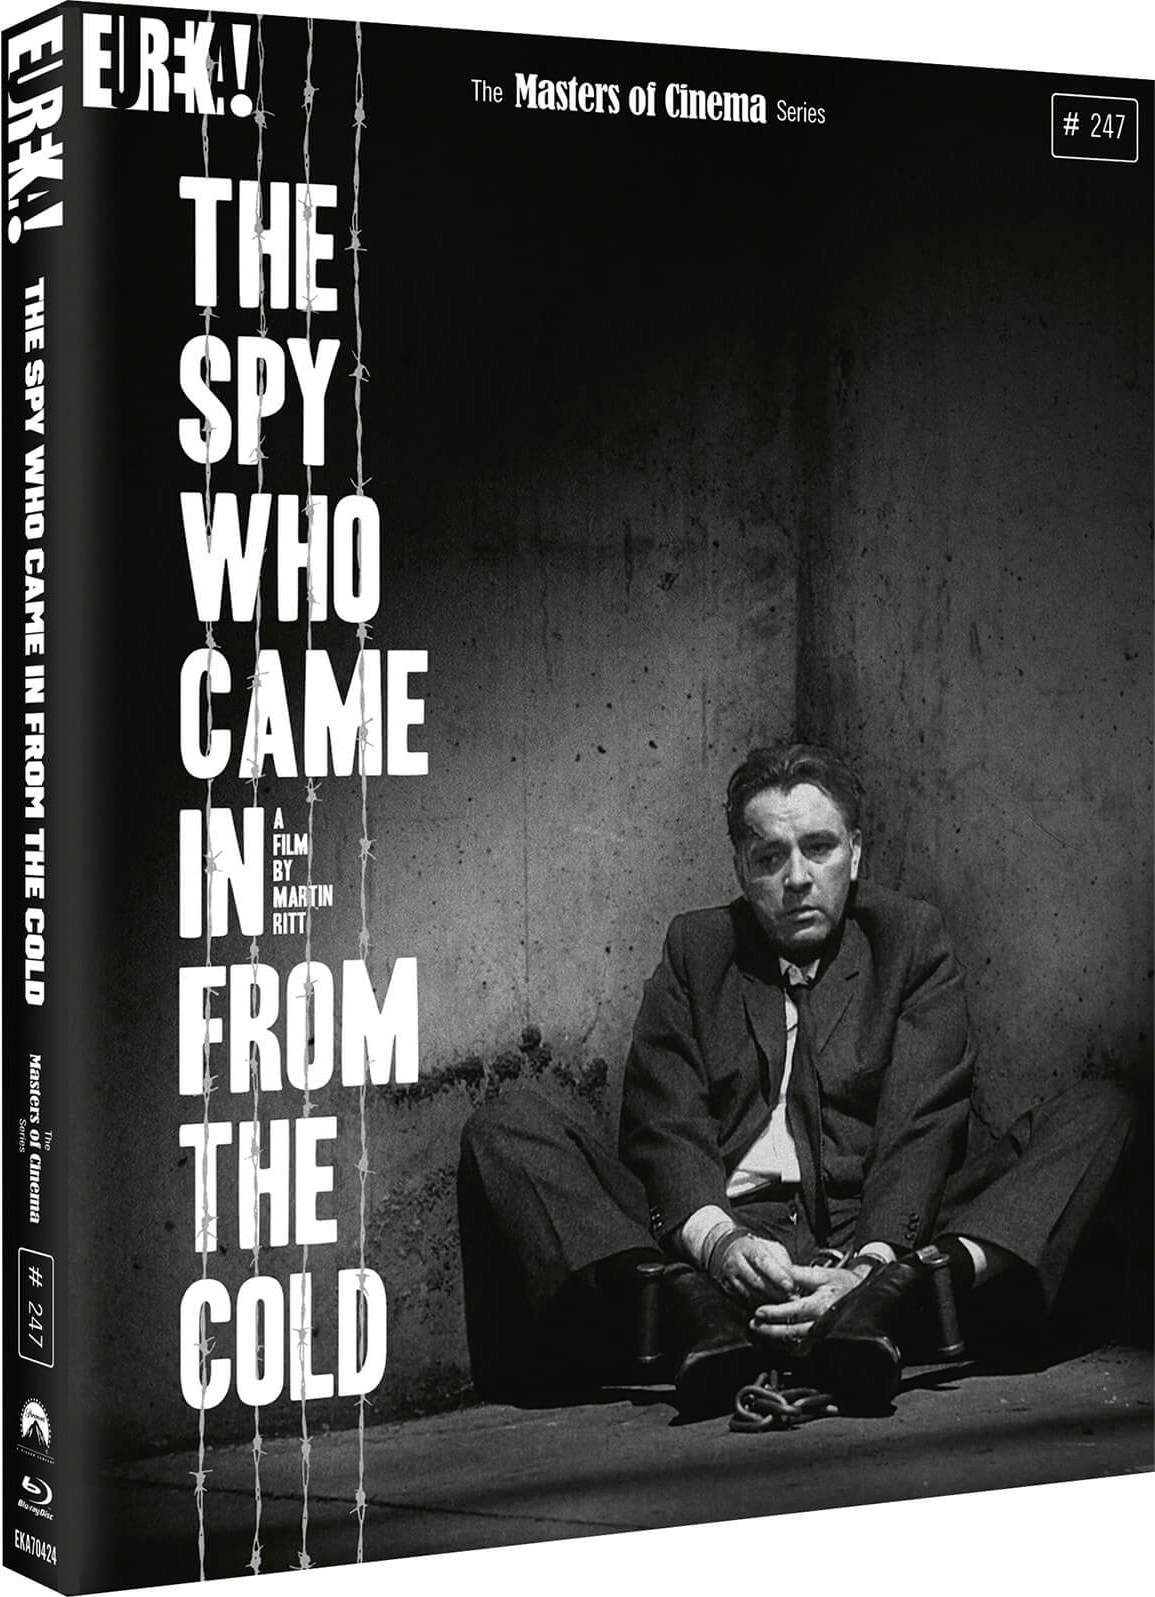 THE SPY WHO CAME IN FROM THE COLD (REGION B IMPORT - LIMITED EDITION) BLU-RAY